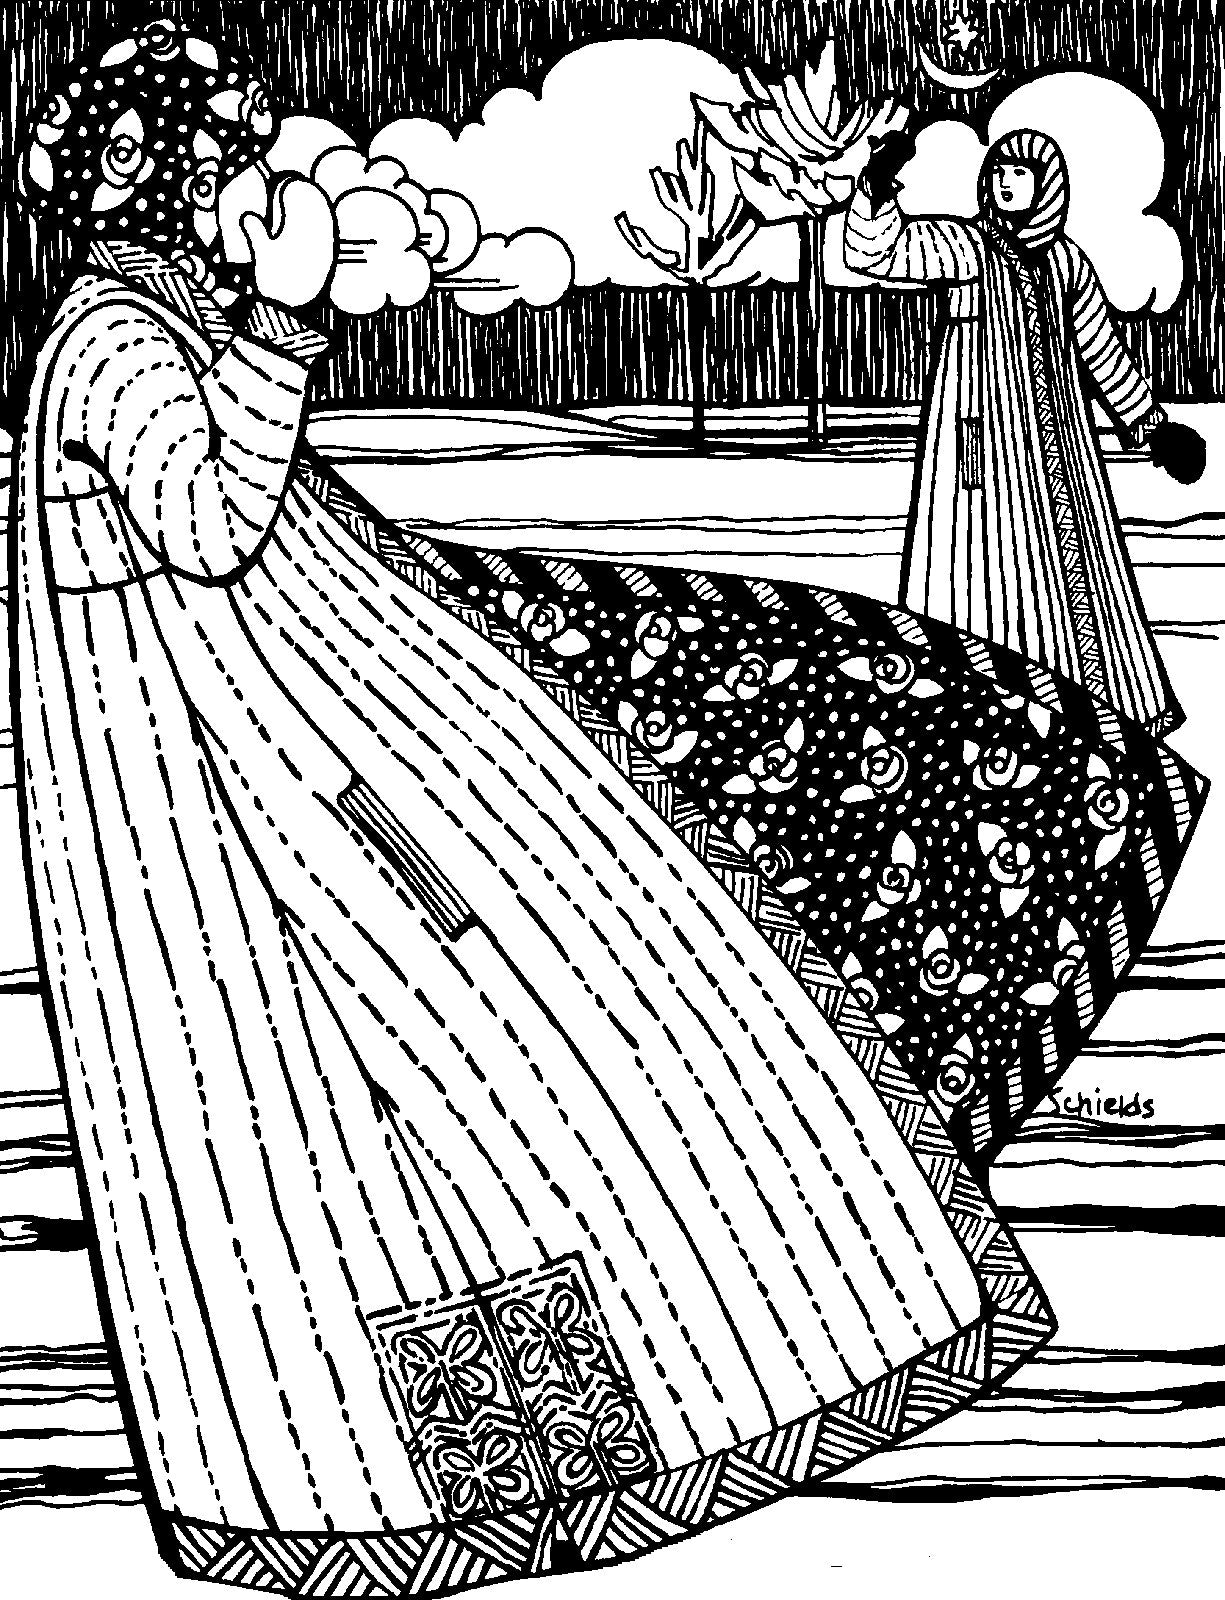 BLack and White pen and ink drawing be artist Gretchen Shields.  Woman in the foreground is facing side with coat blowing open in the wind.  Woman in background has arm raised as if waving to the other.  Trees and clouds are in the background.